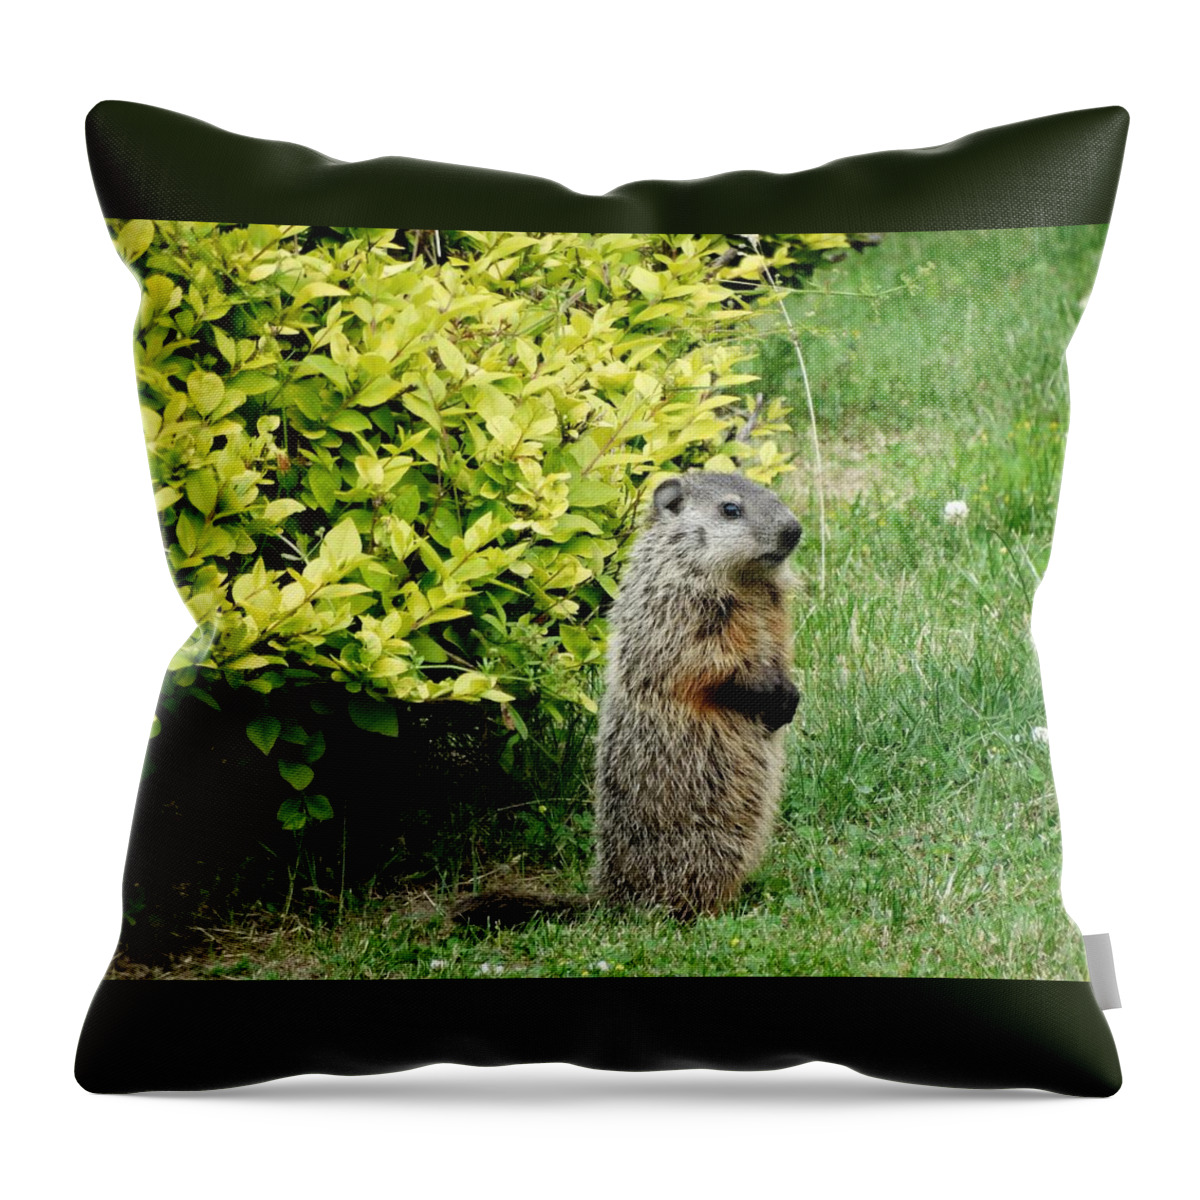 Groundhog Throw Pillow featuring the photograph Baby Groundhog Poses By Golden Privets by Susan Sam